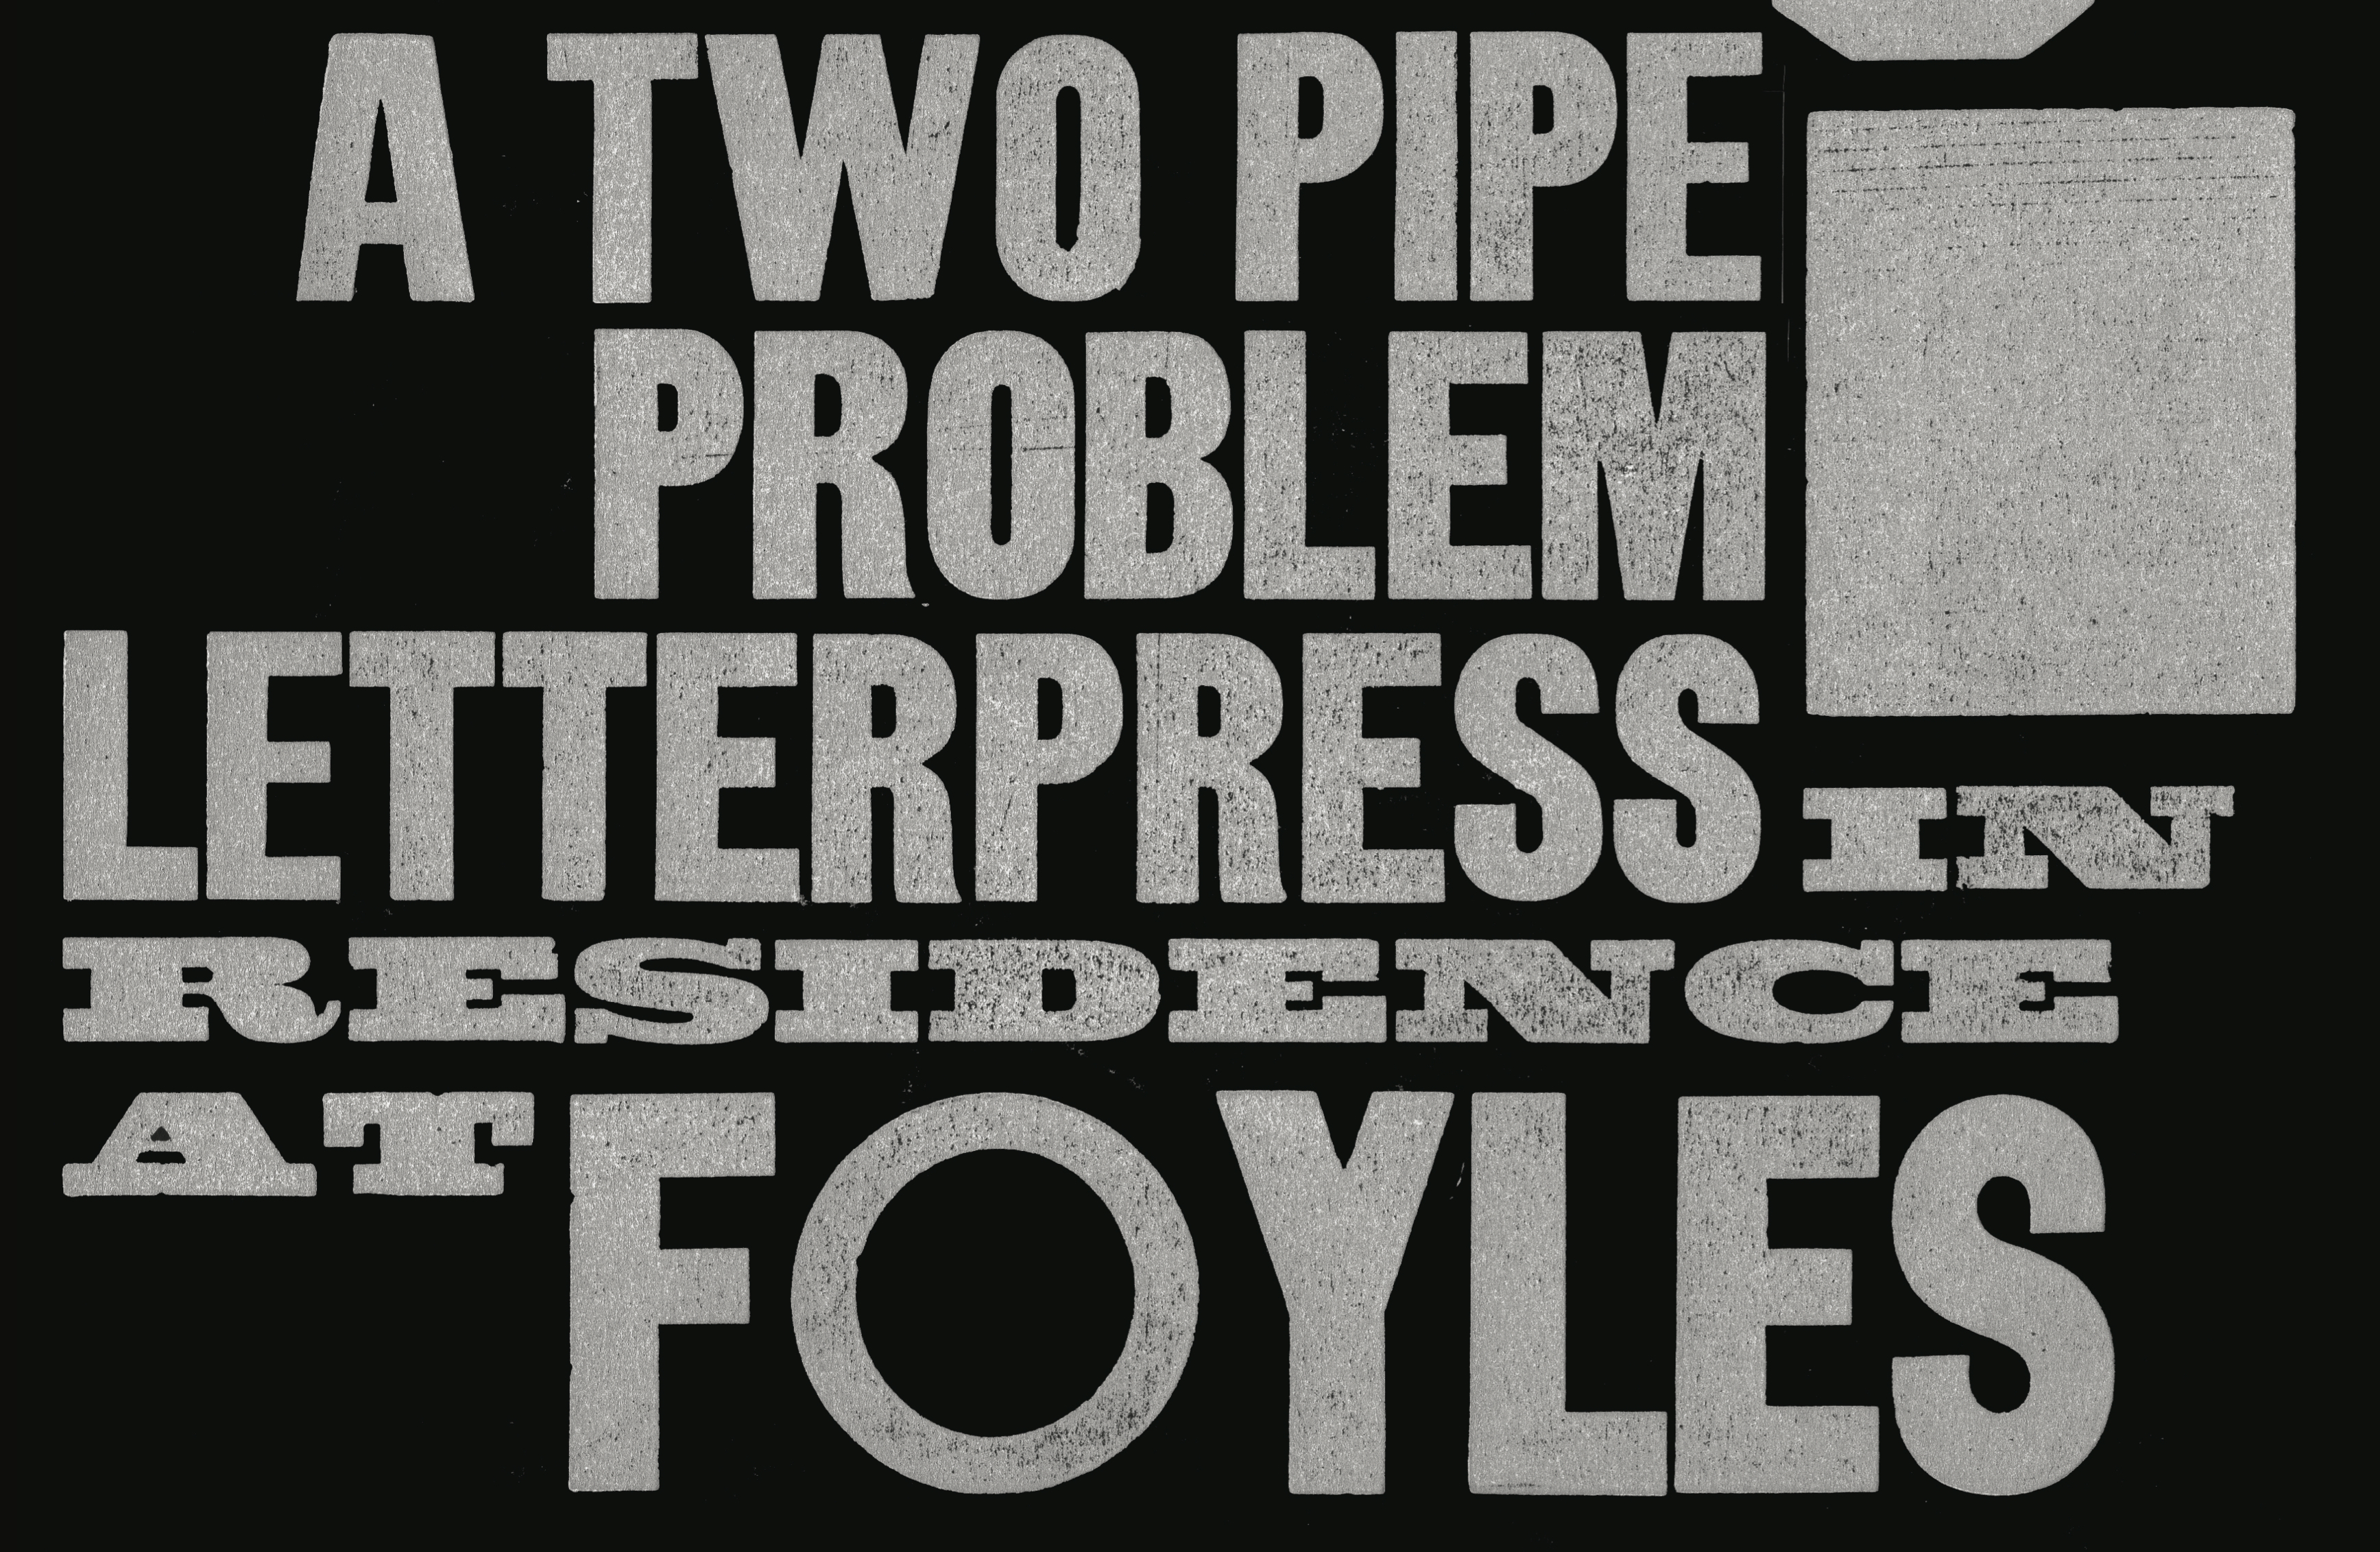 Pop Up Launch: A Two Pipe Problem Letterpress at The Gallery at